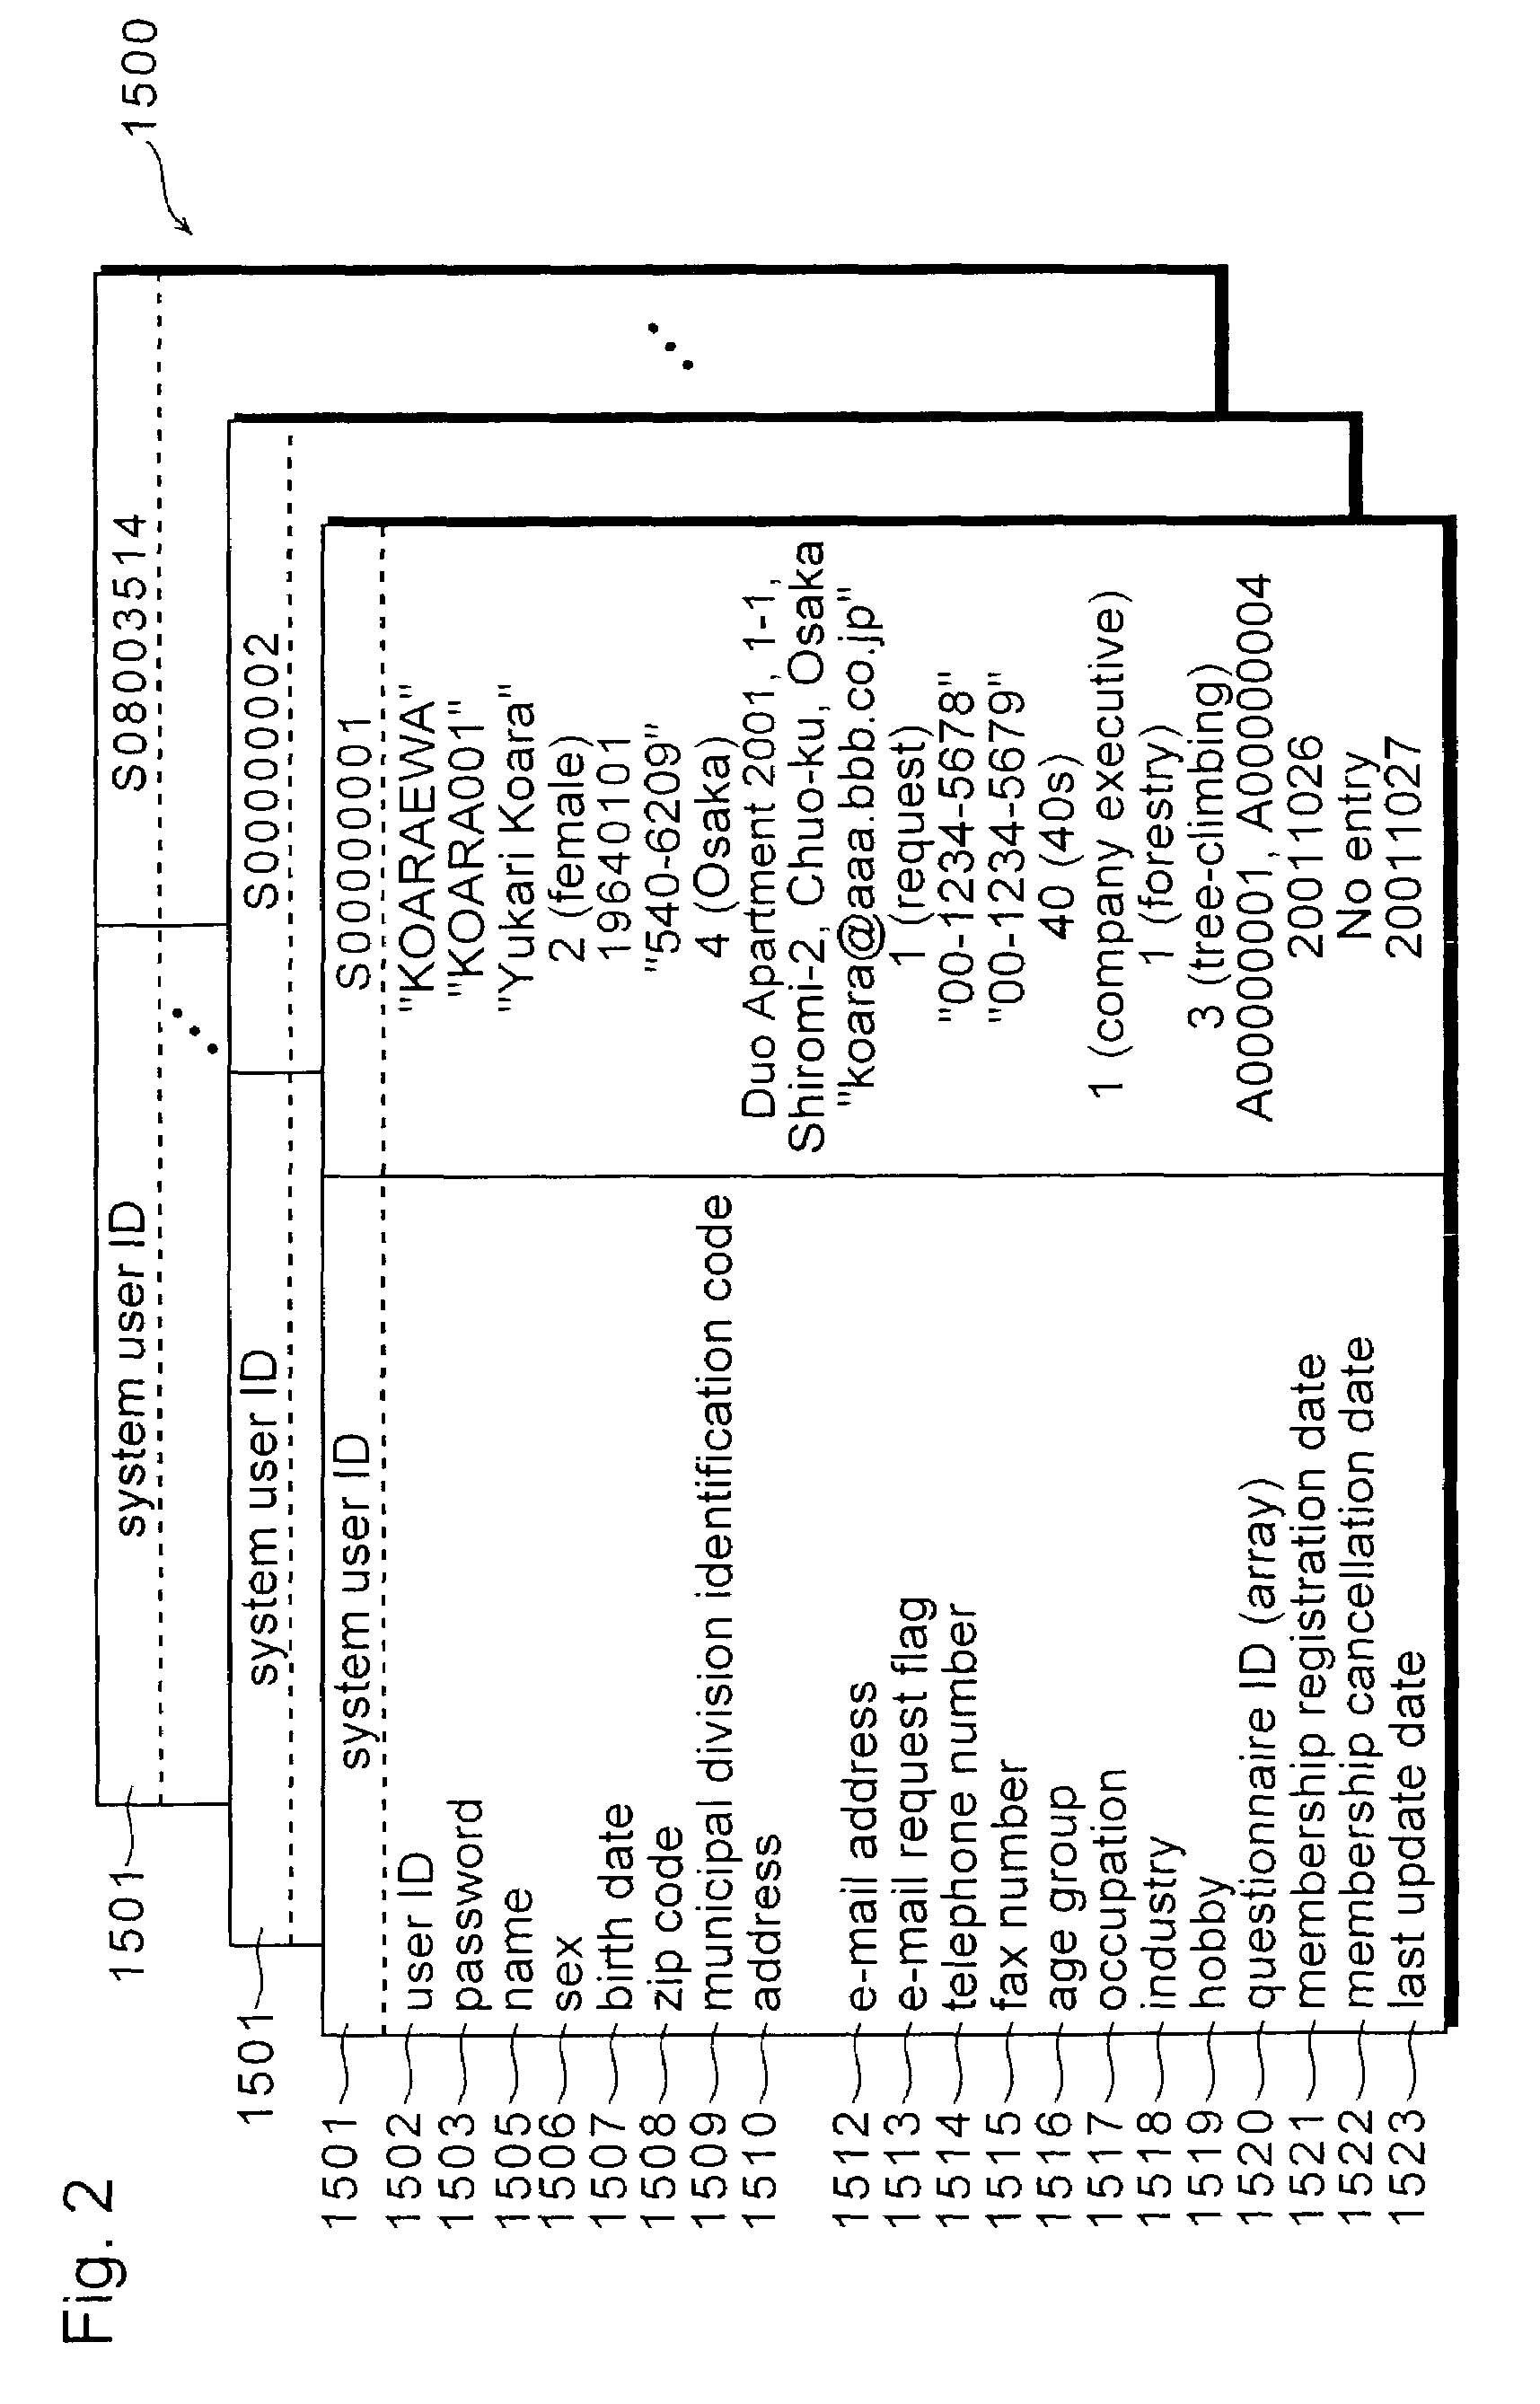 Product information management device